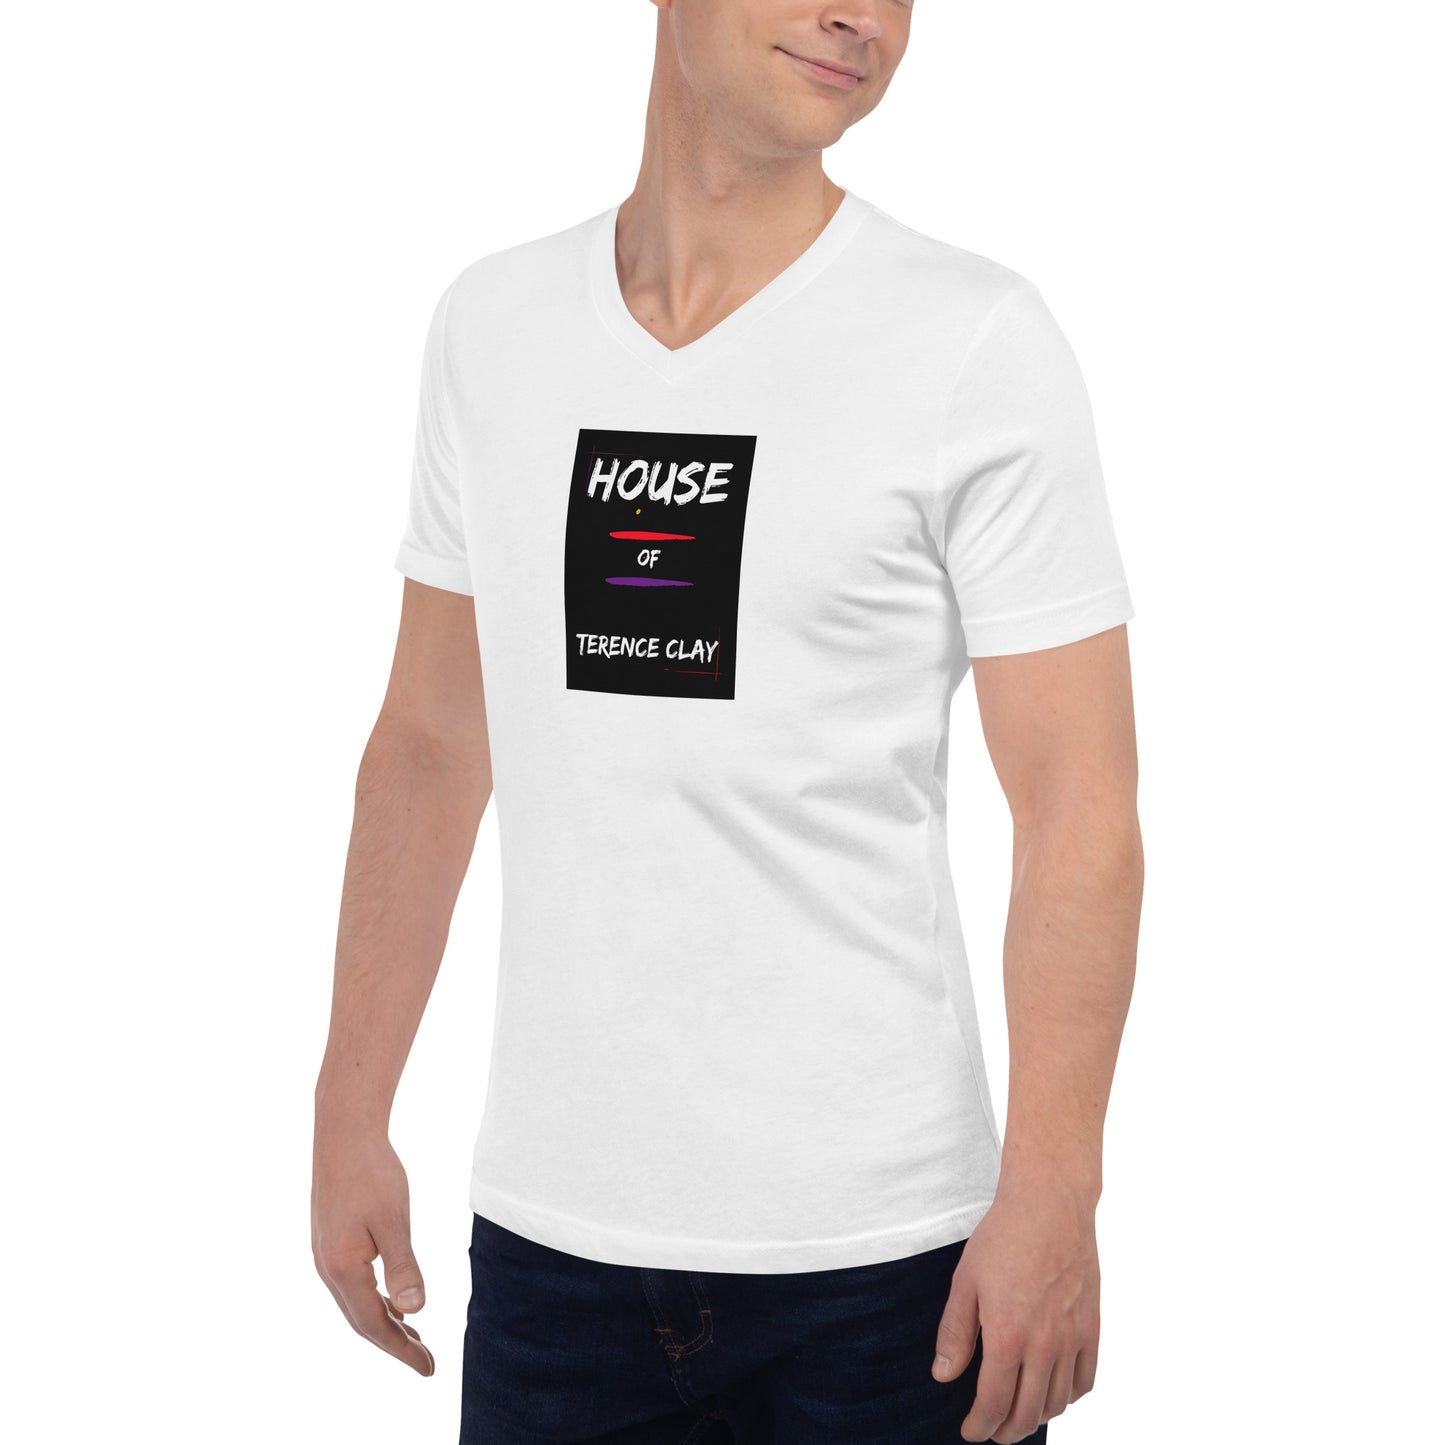 "HOUSE of Terence Clay 90's Retro-Look" V-Neck T-Shirt - Black Box